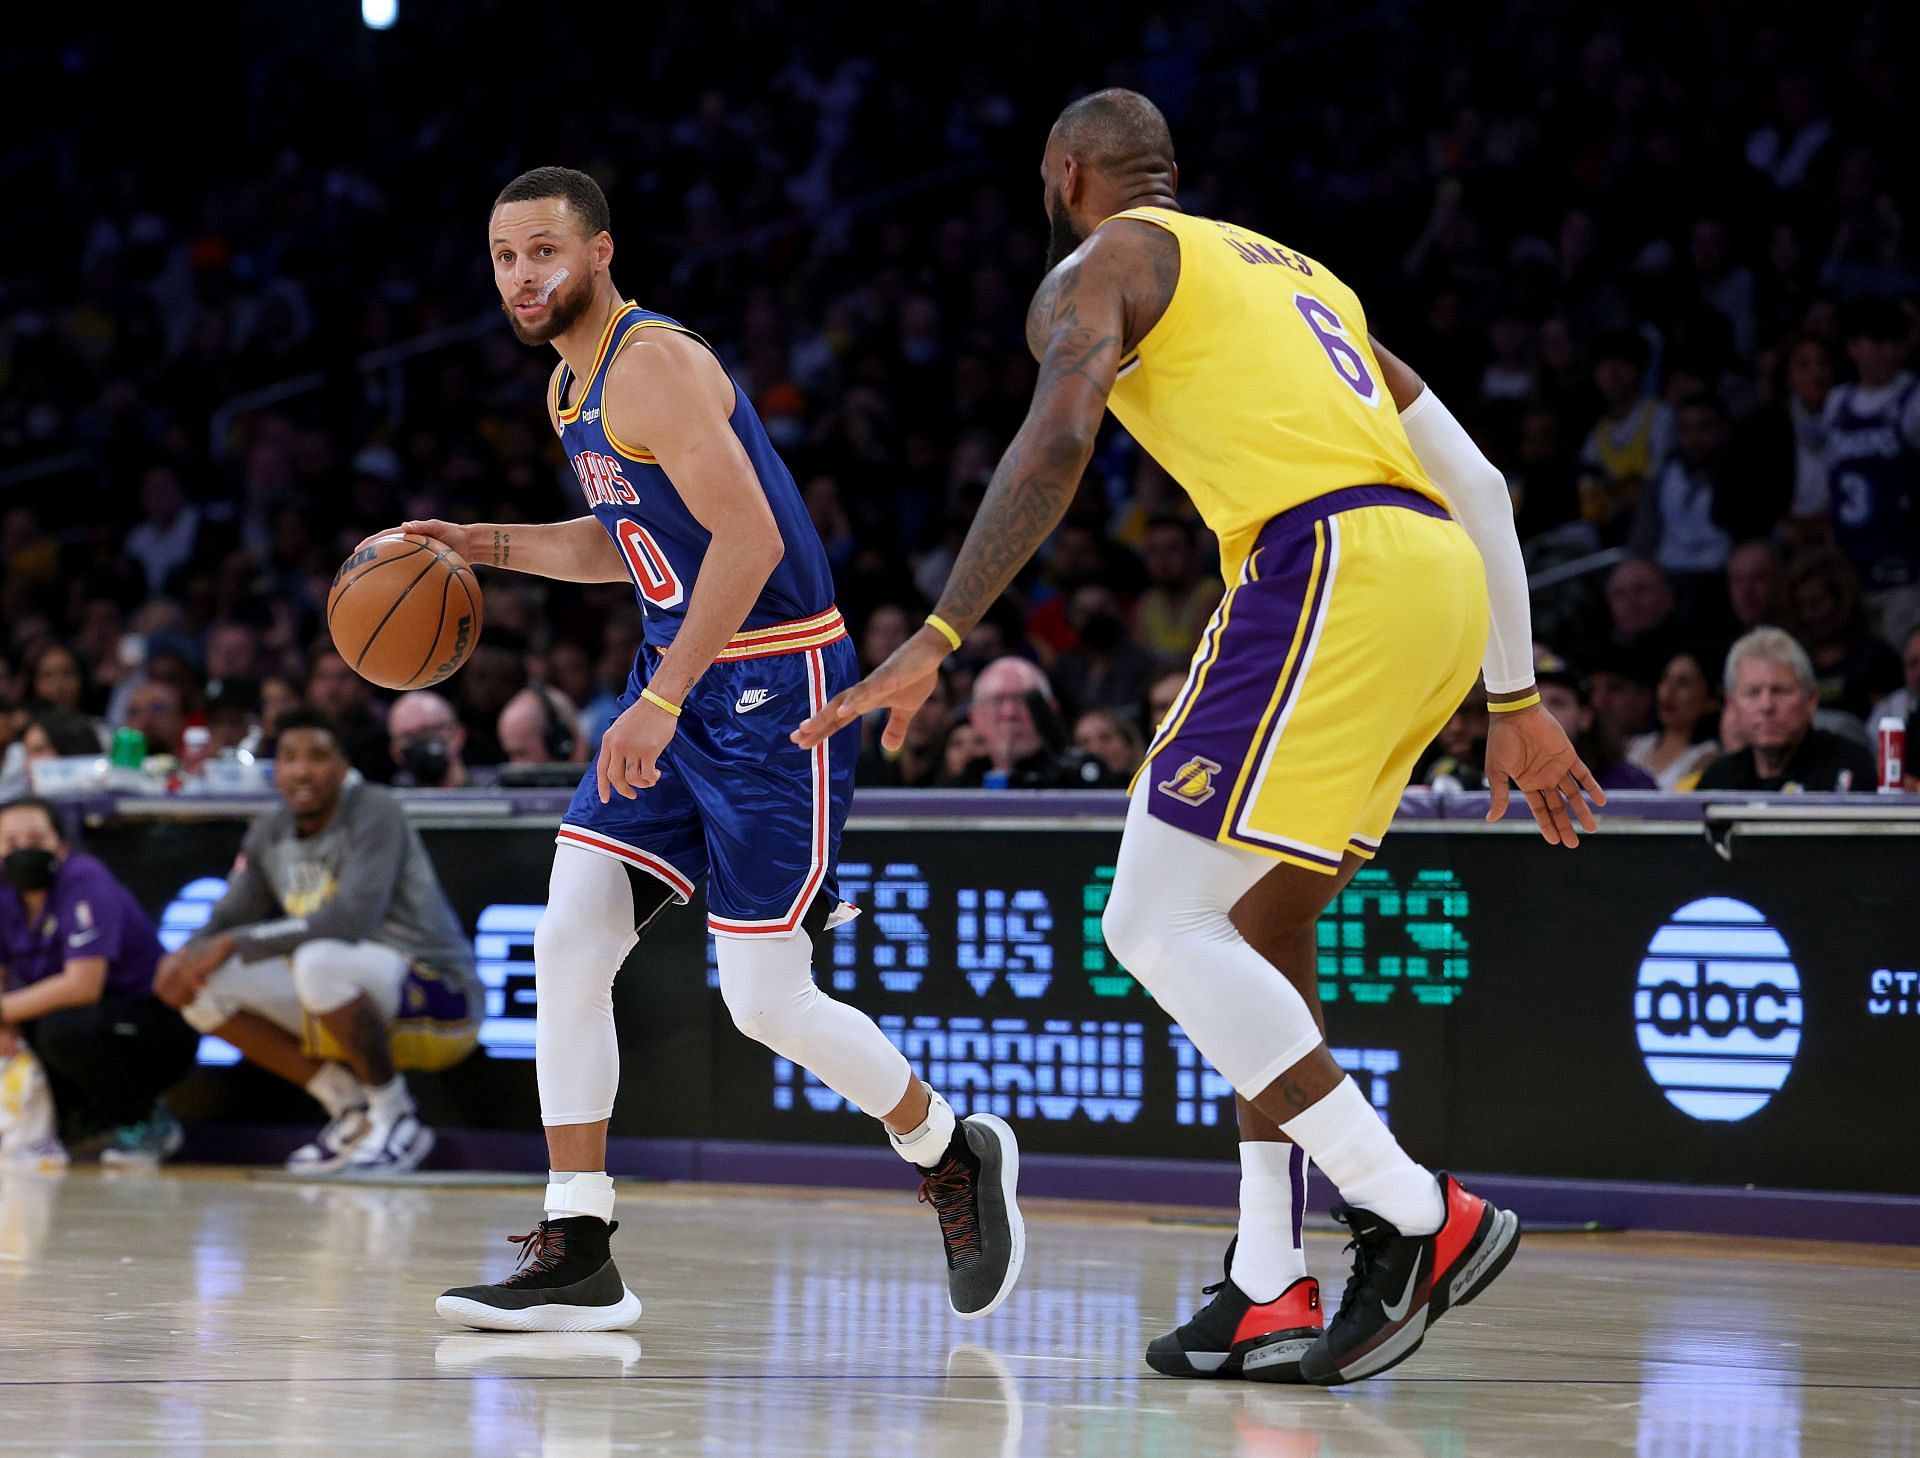 Steph Curry of the Golden State Warriors dribbles in front of LeBron James of the LA Lakers during the first half on March 5 in Los Angeles, California.